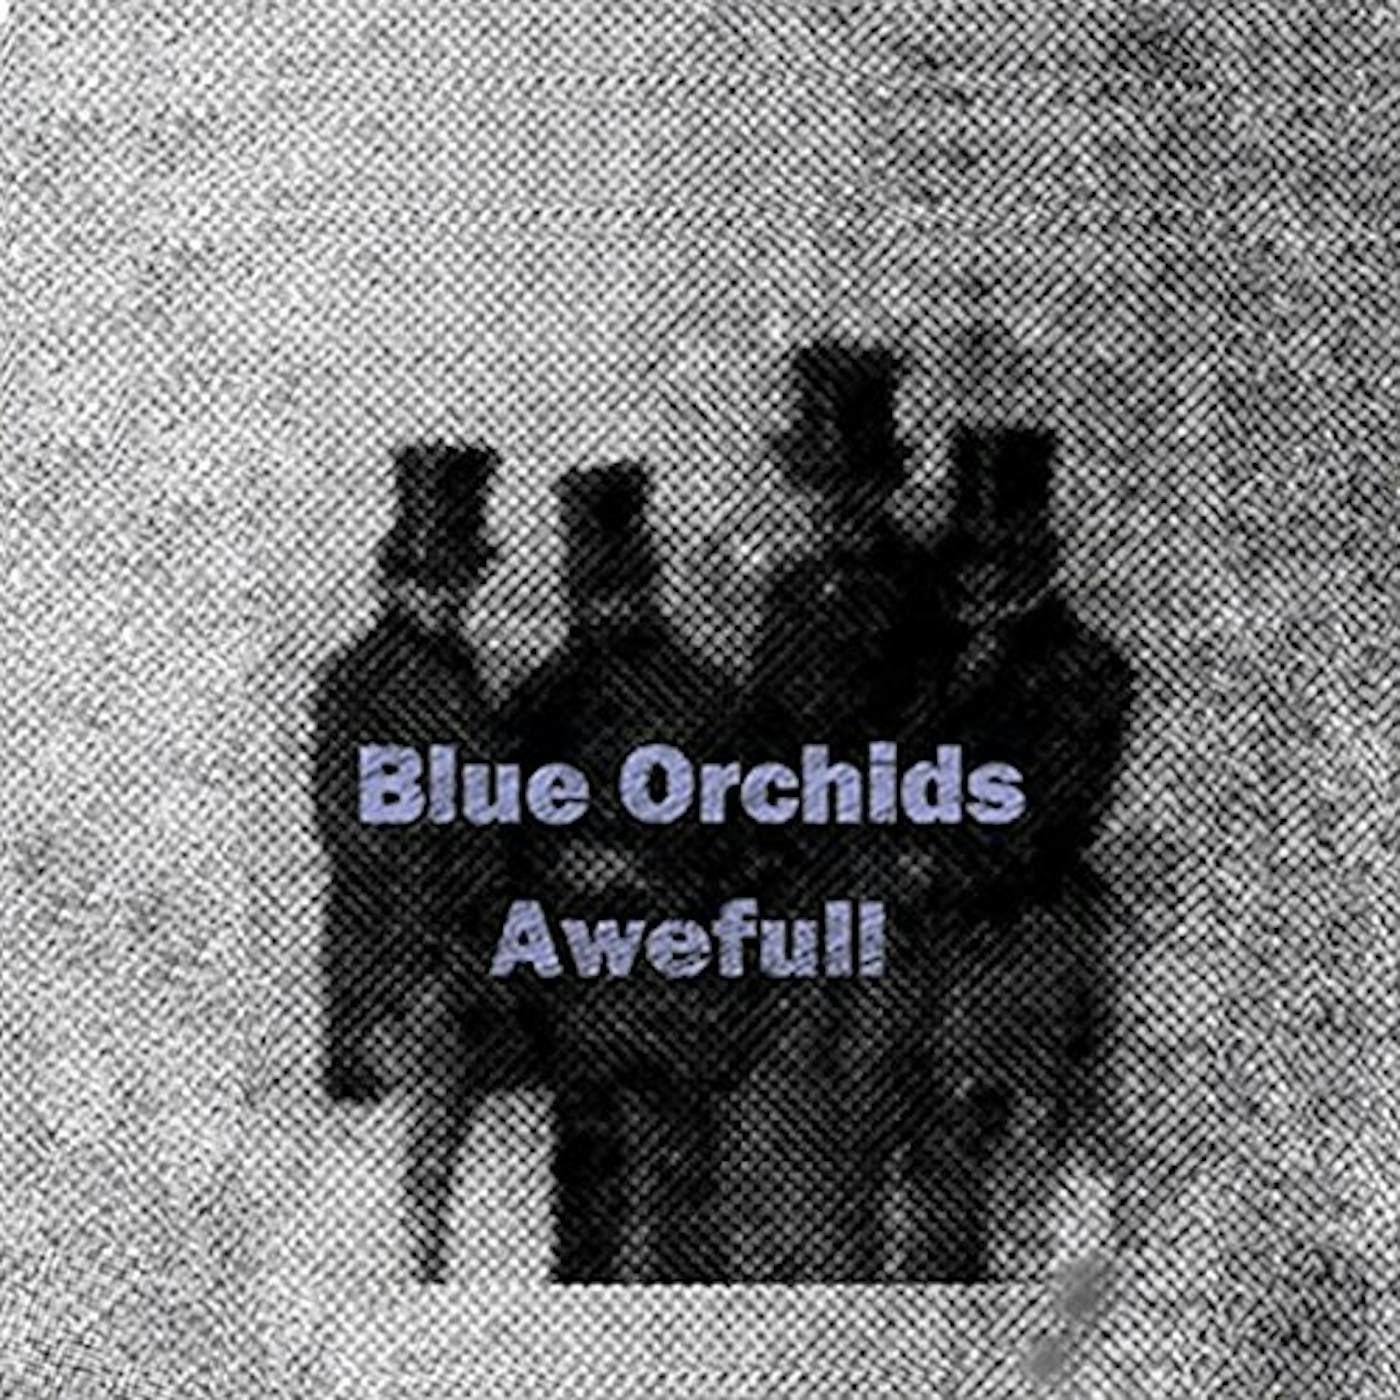 Blue Orchids AWEFULL Vinyl Record - UK Release